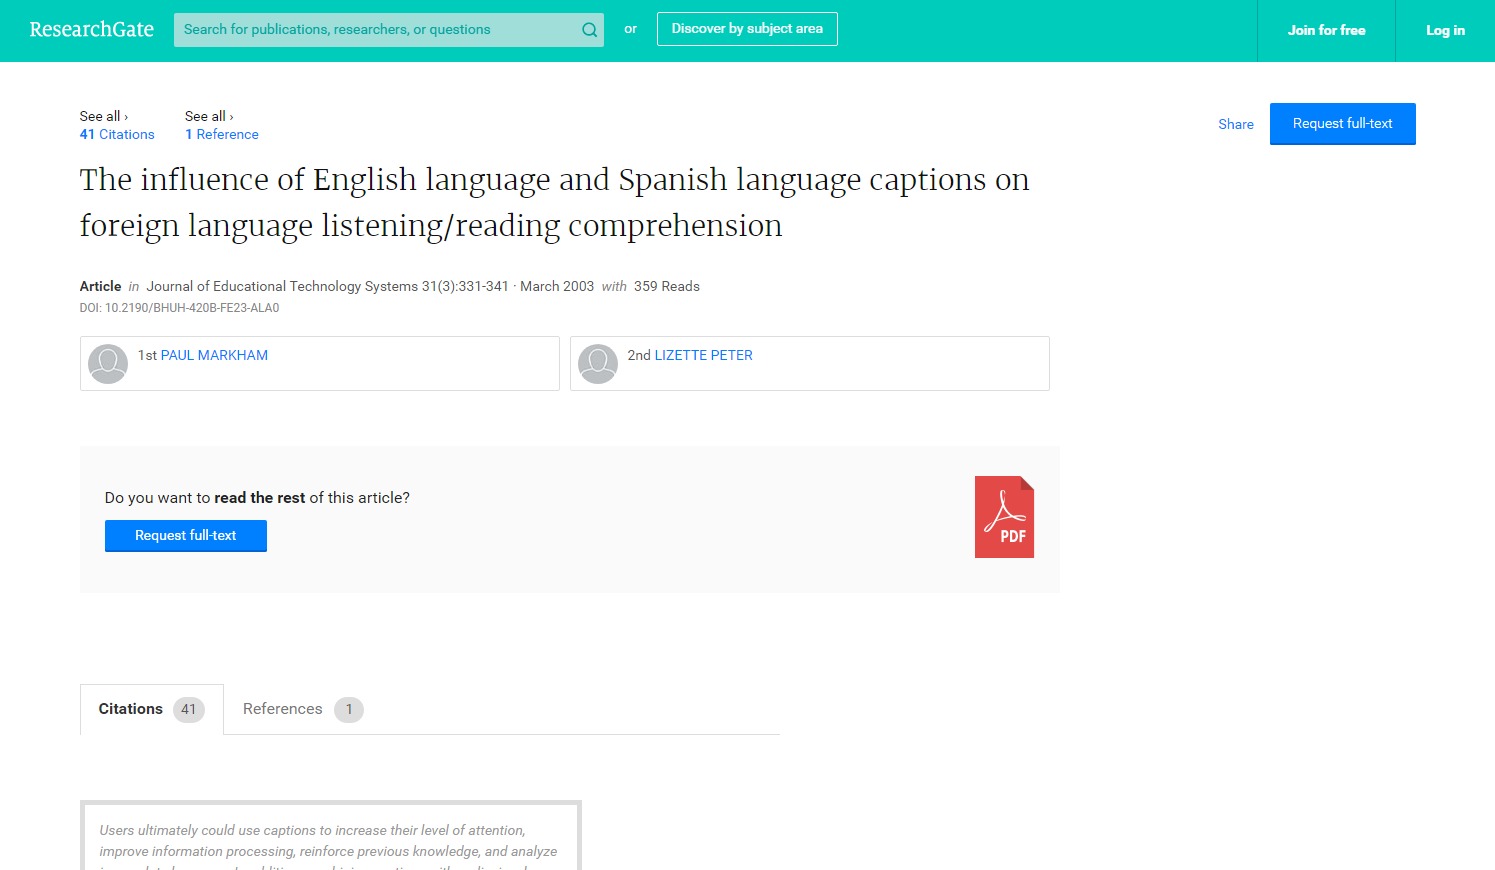 Image from: The Influence of English Language and Spanish Language Captions on Foreign Language Listening/Reading Comprehension